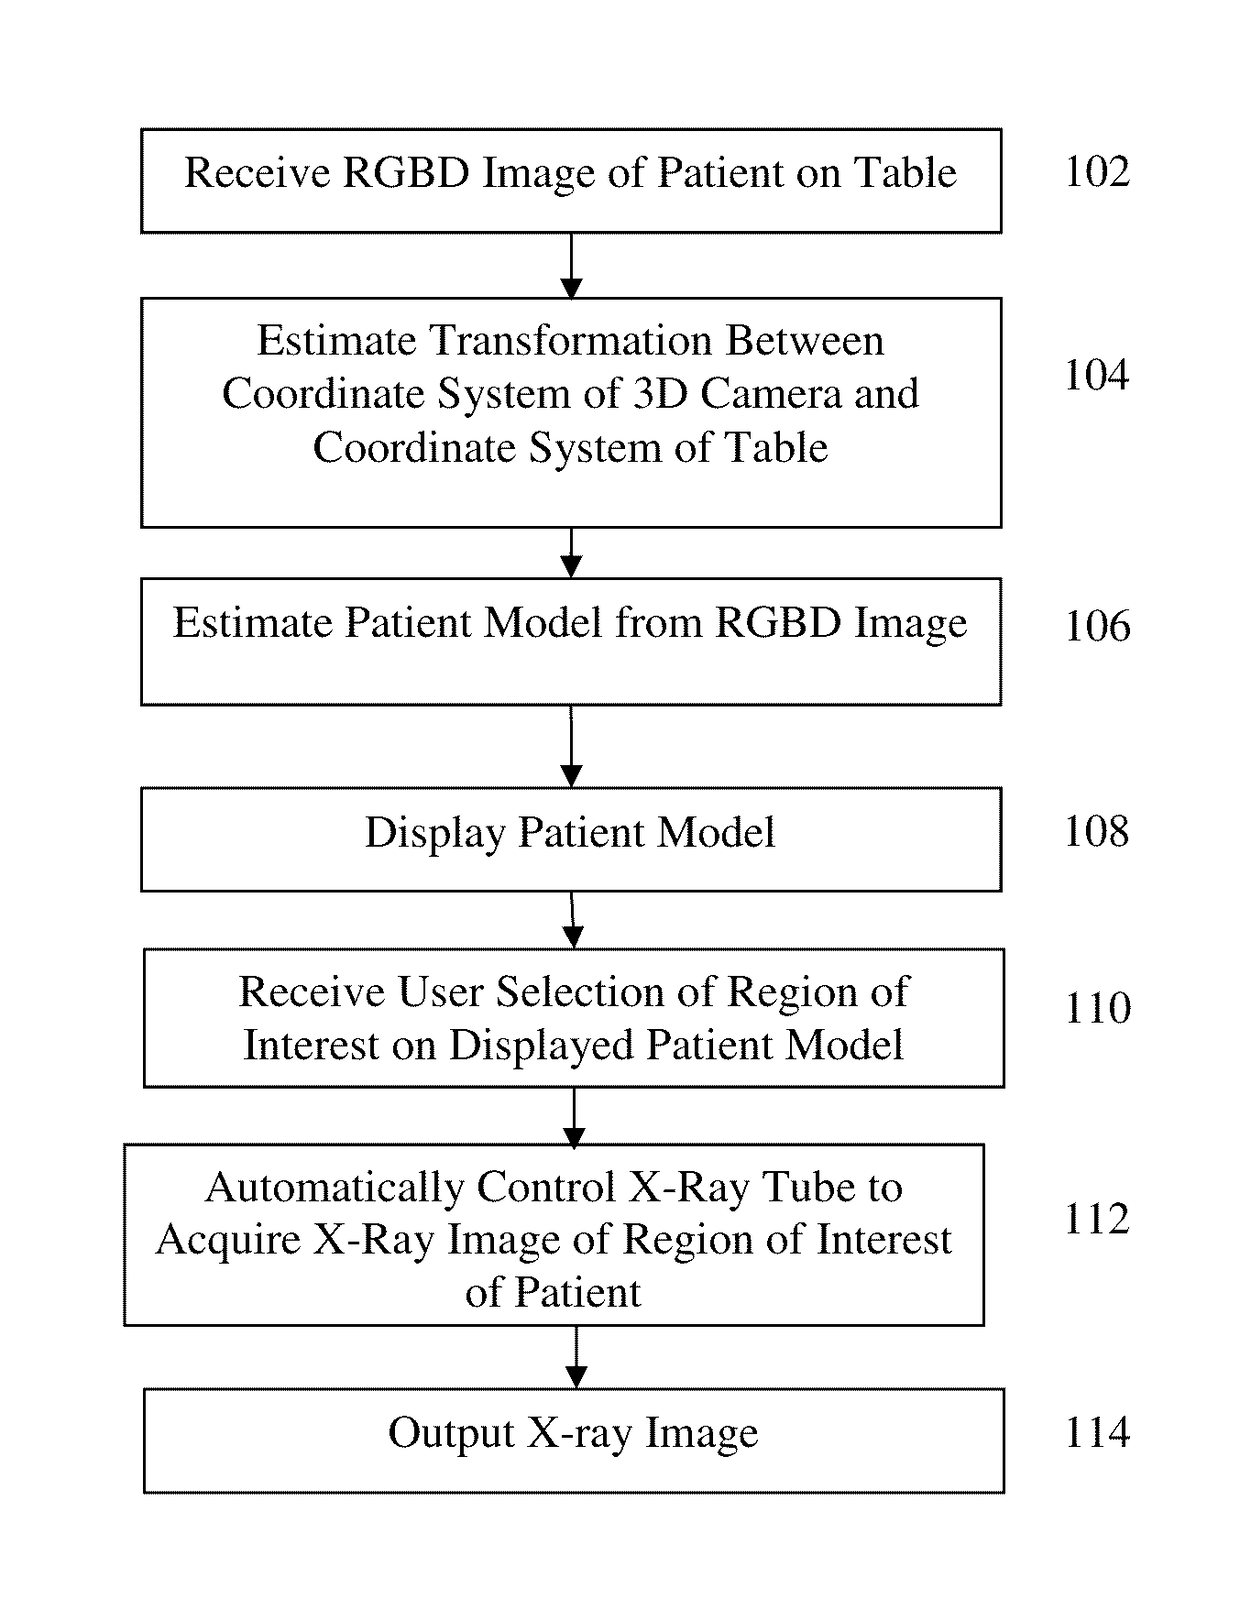 Method and System of Scanner Automation for X-Ray Tube with 3D Camera